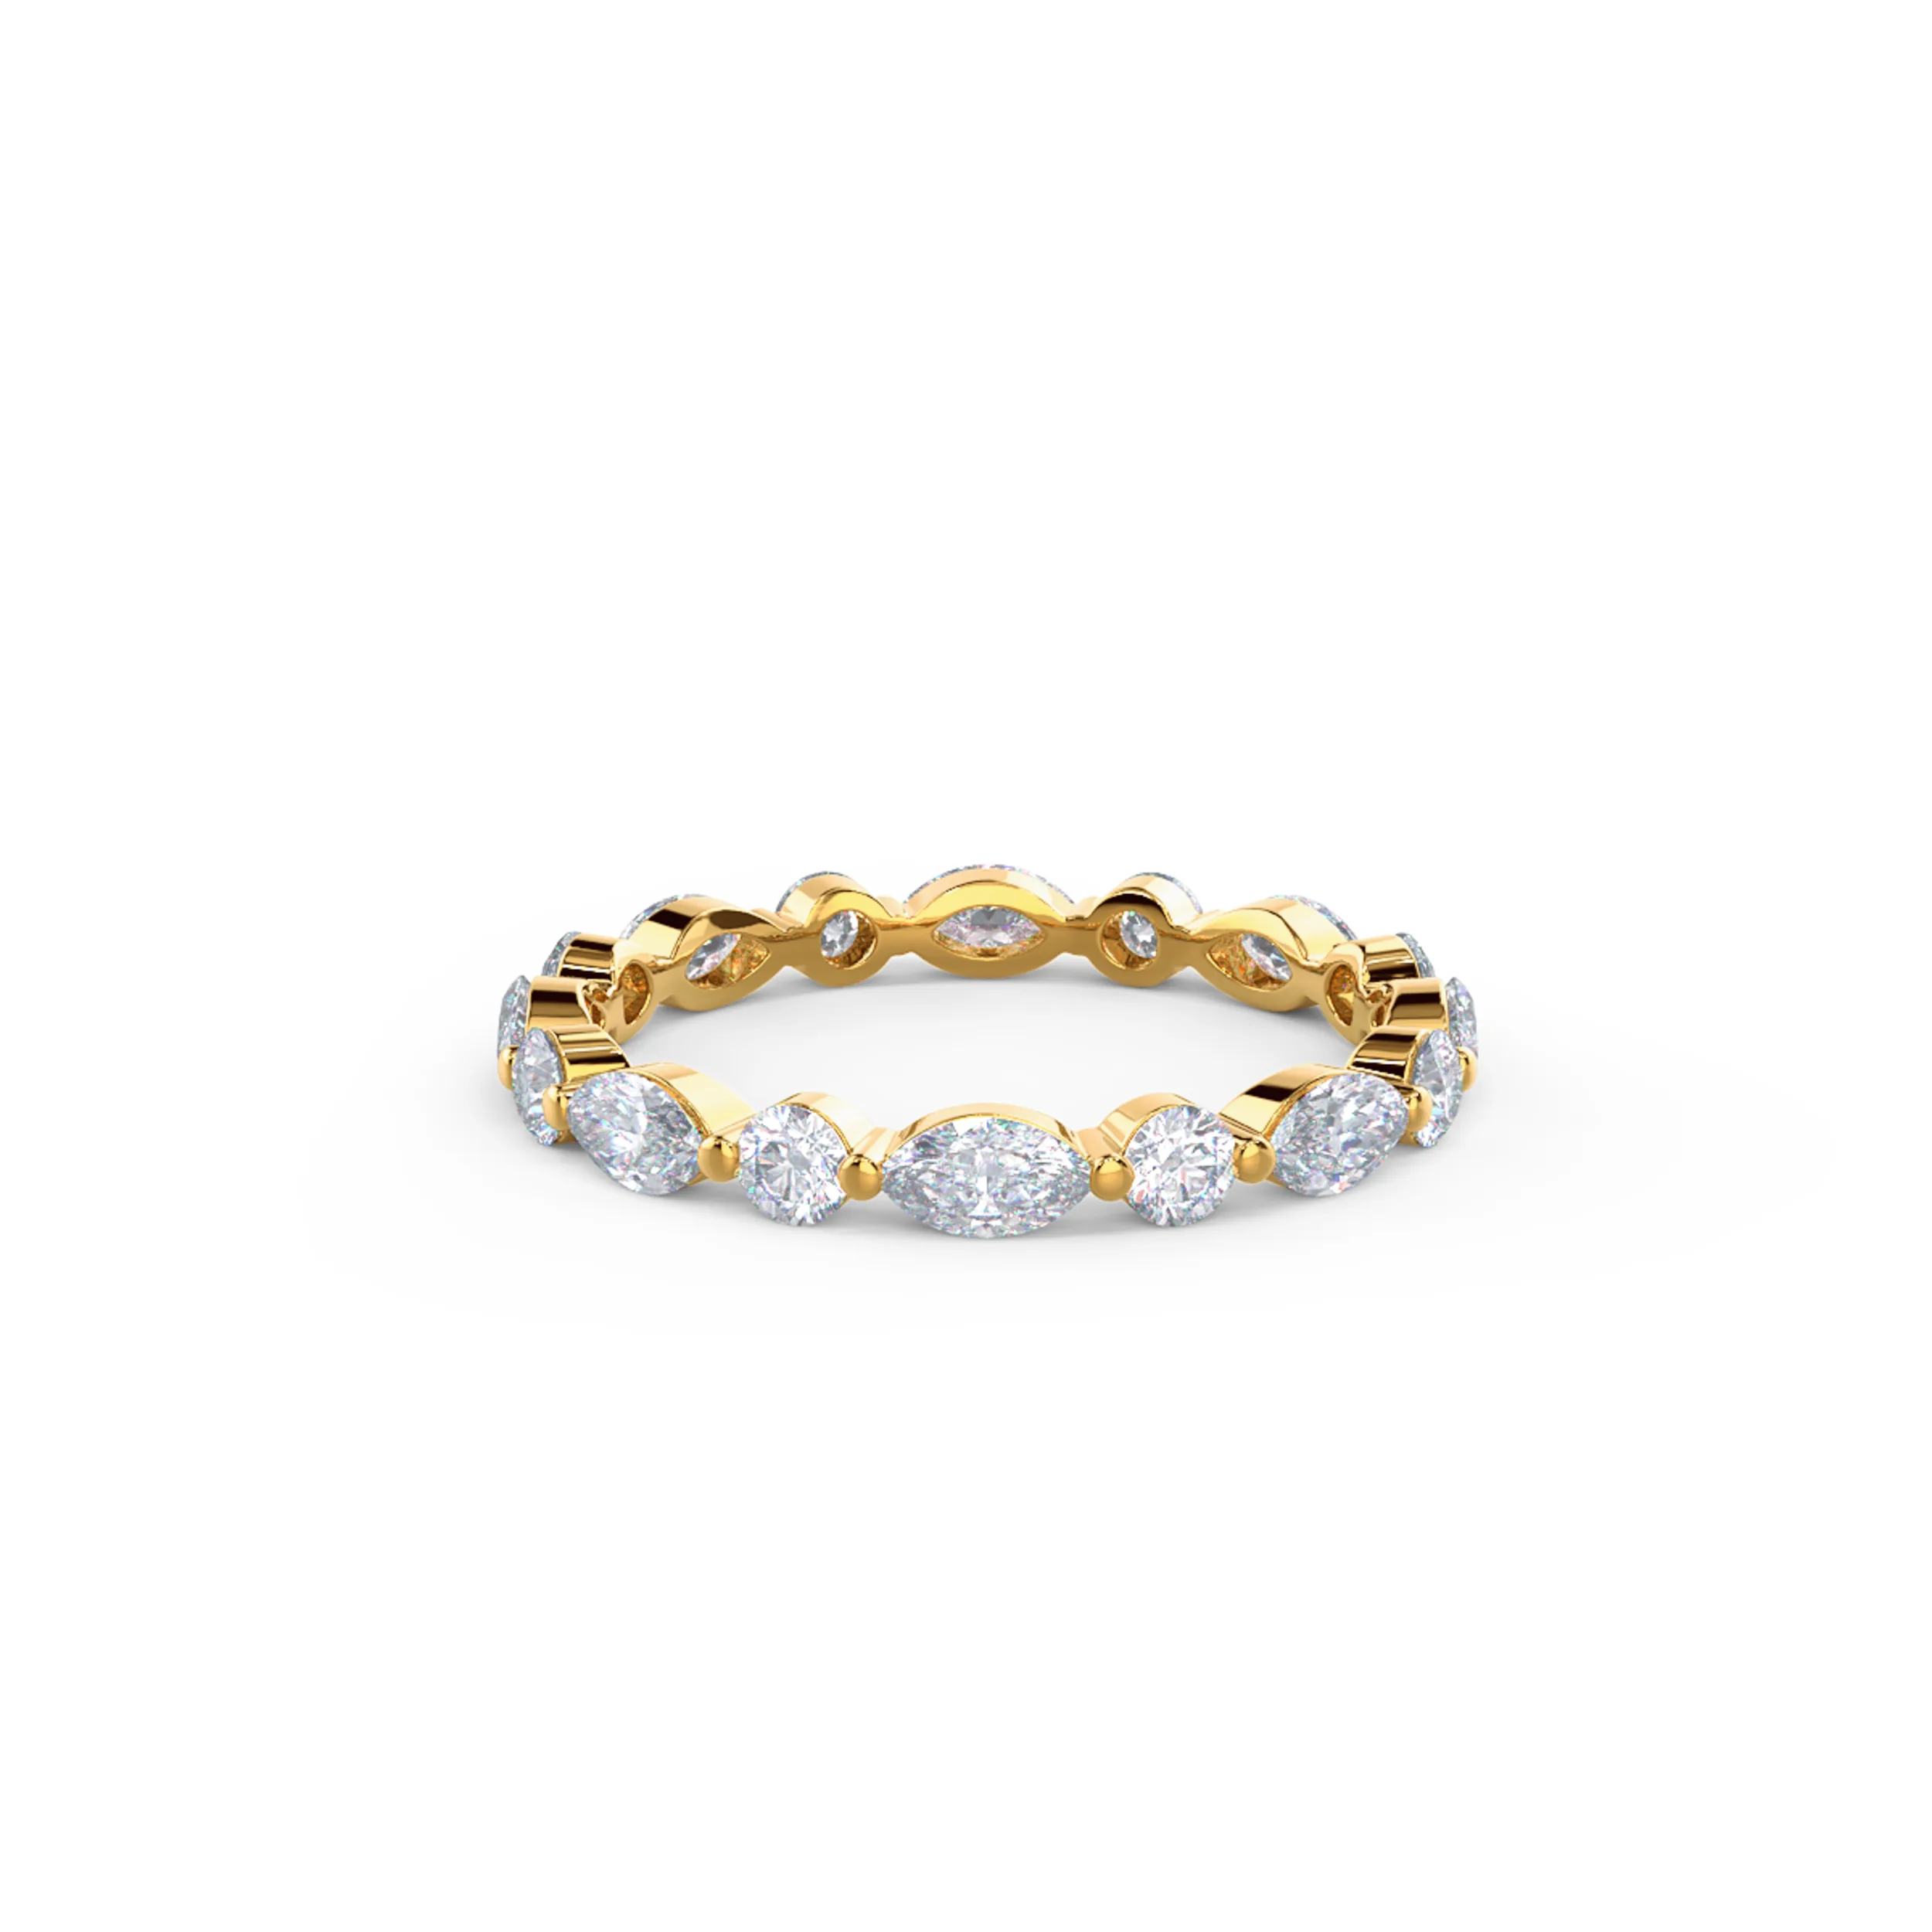 1.2 Carat Diamonds set in Yellow Gold Marquise and Round East-West Eternity Band (Main View)